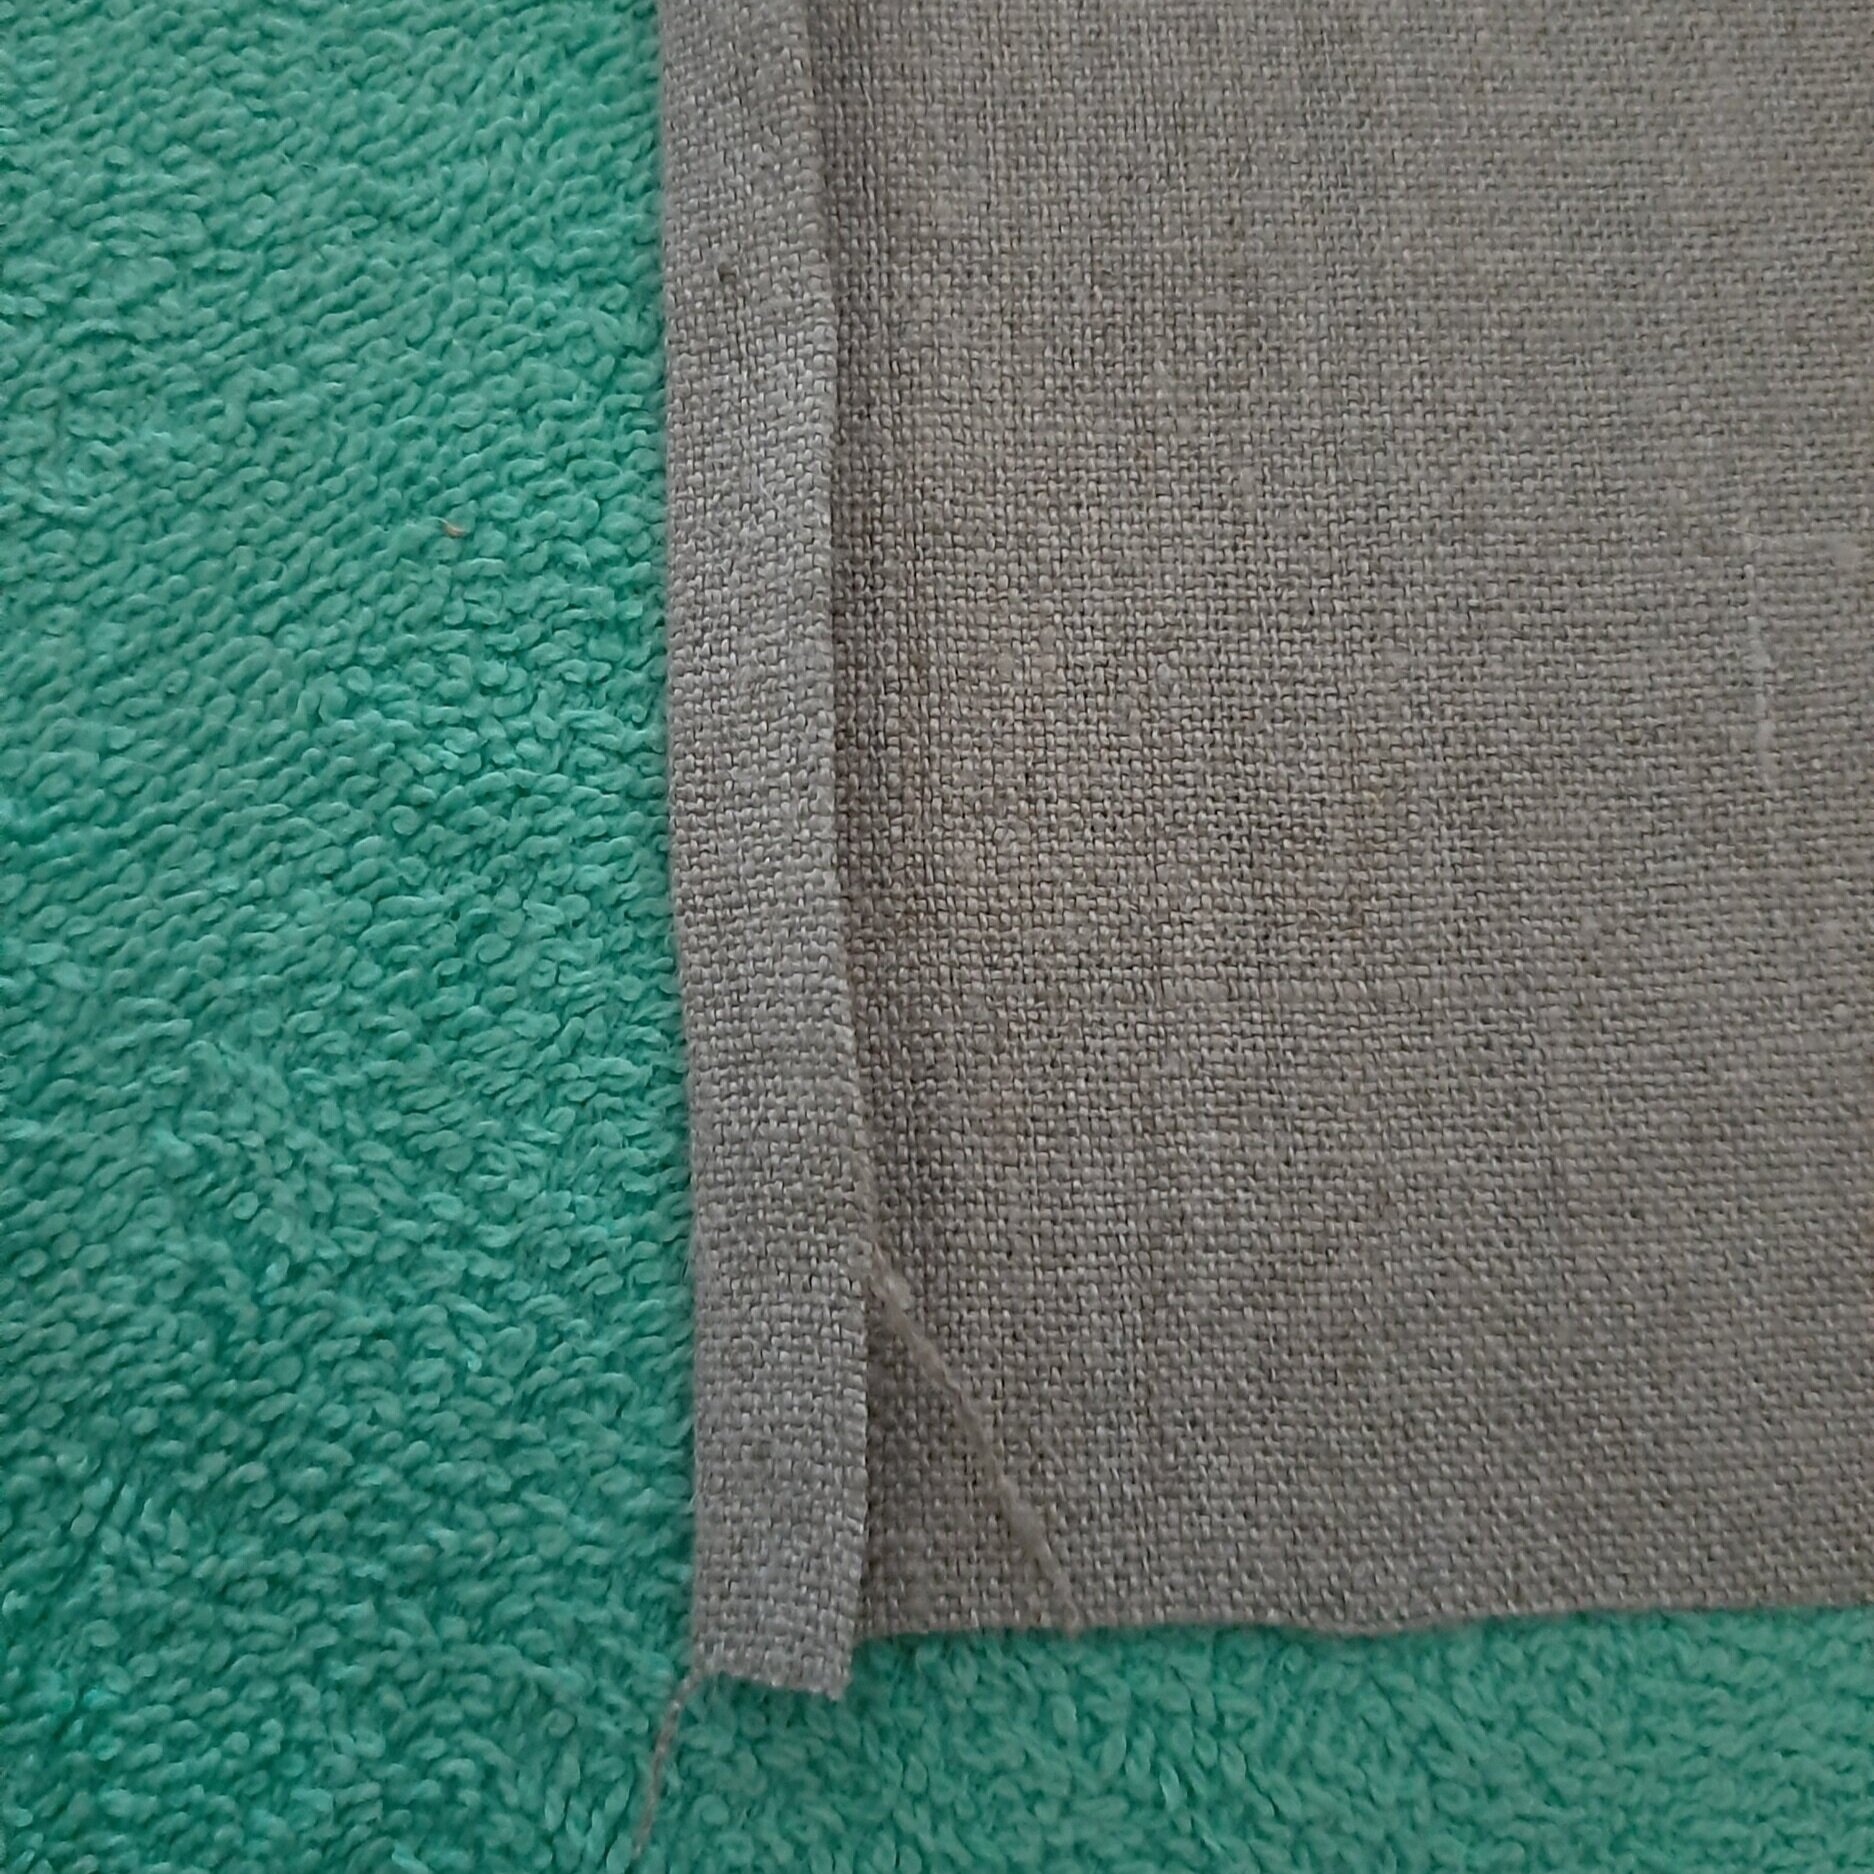 Folded and pressed at 1cm